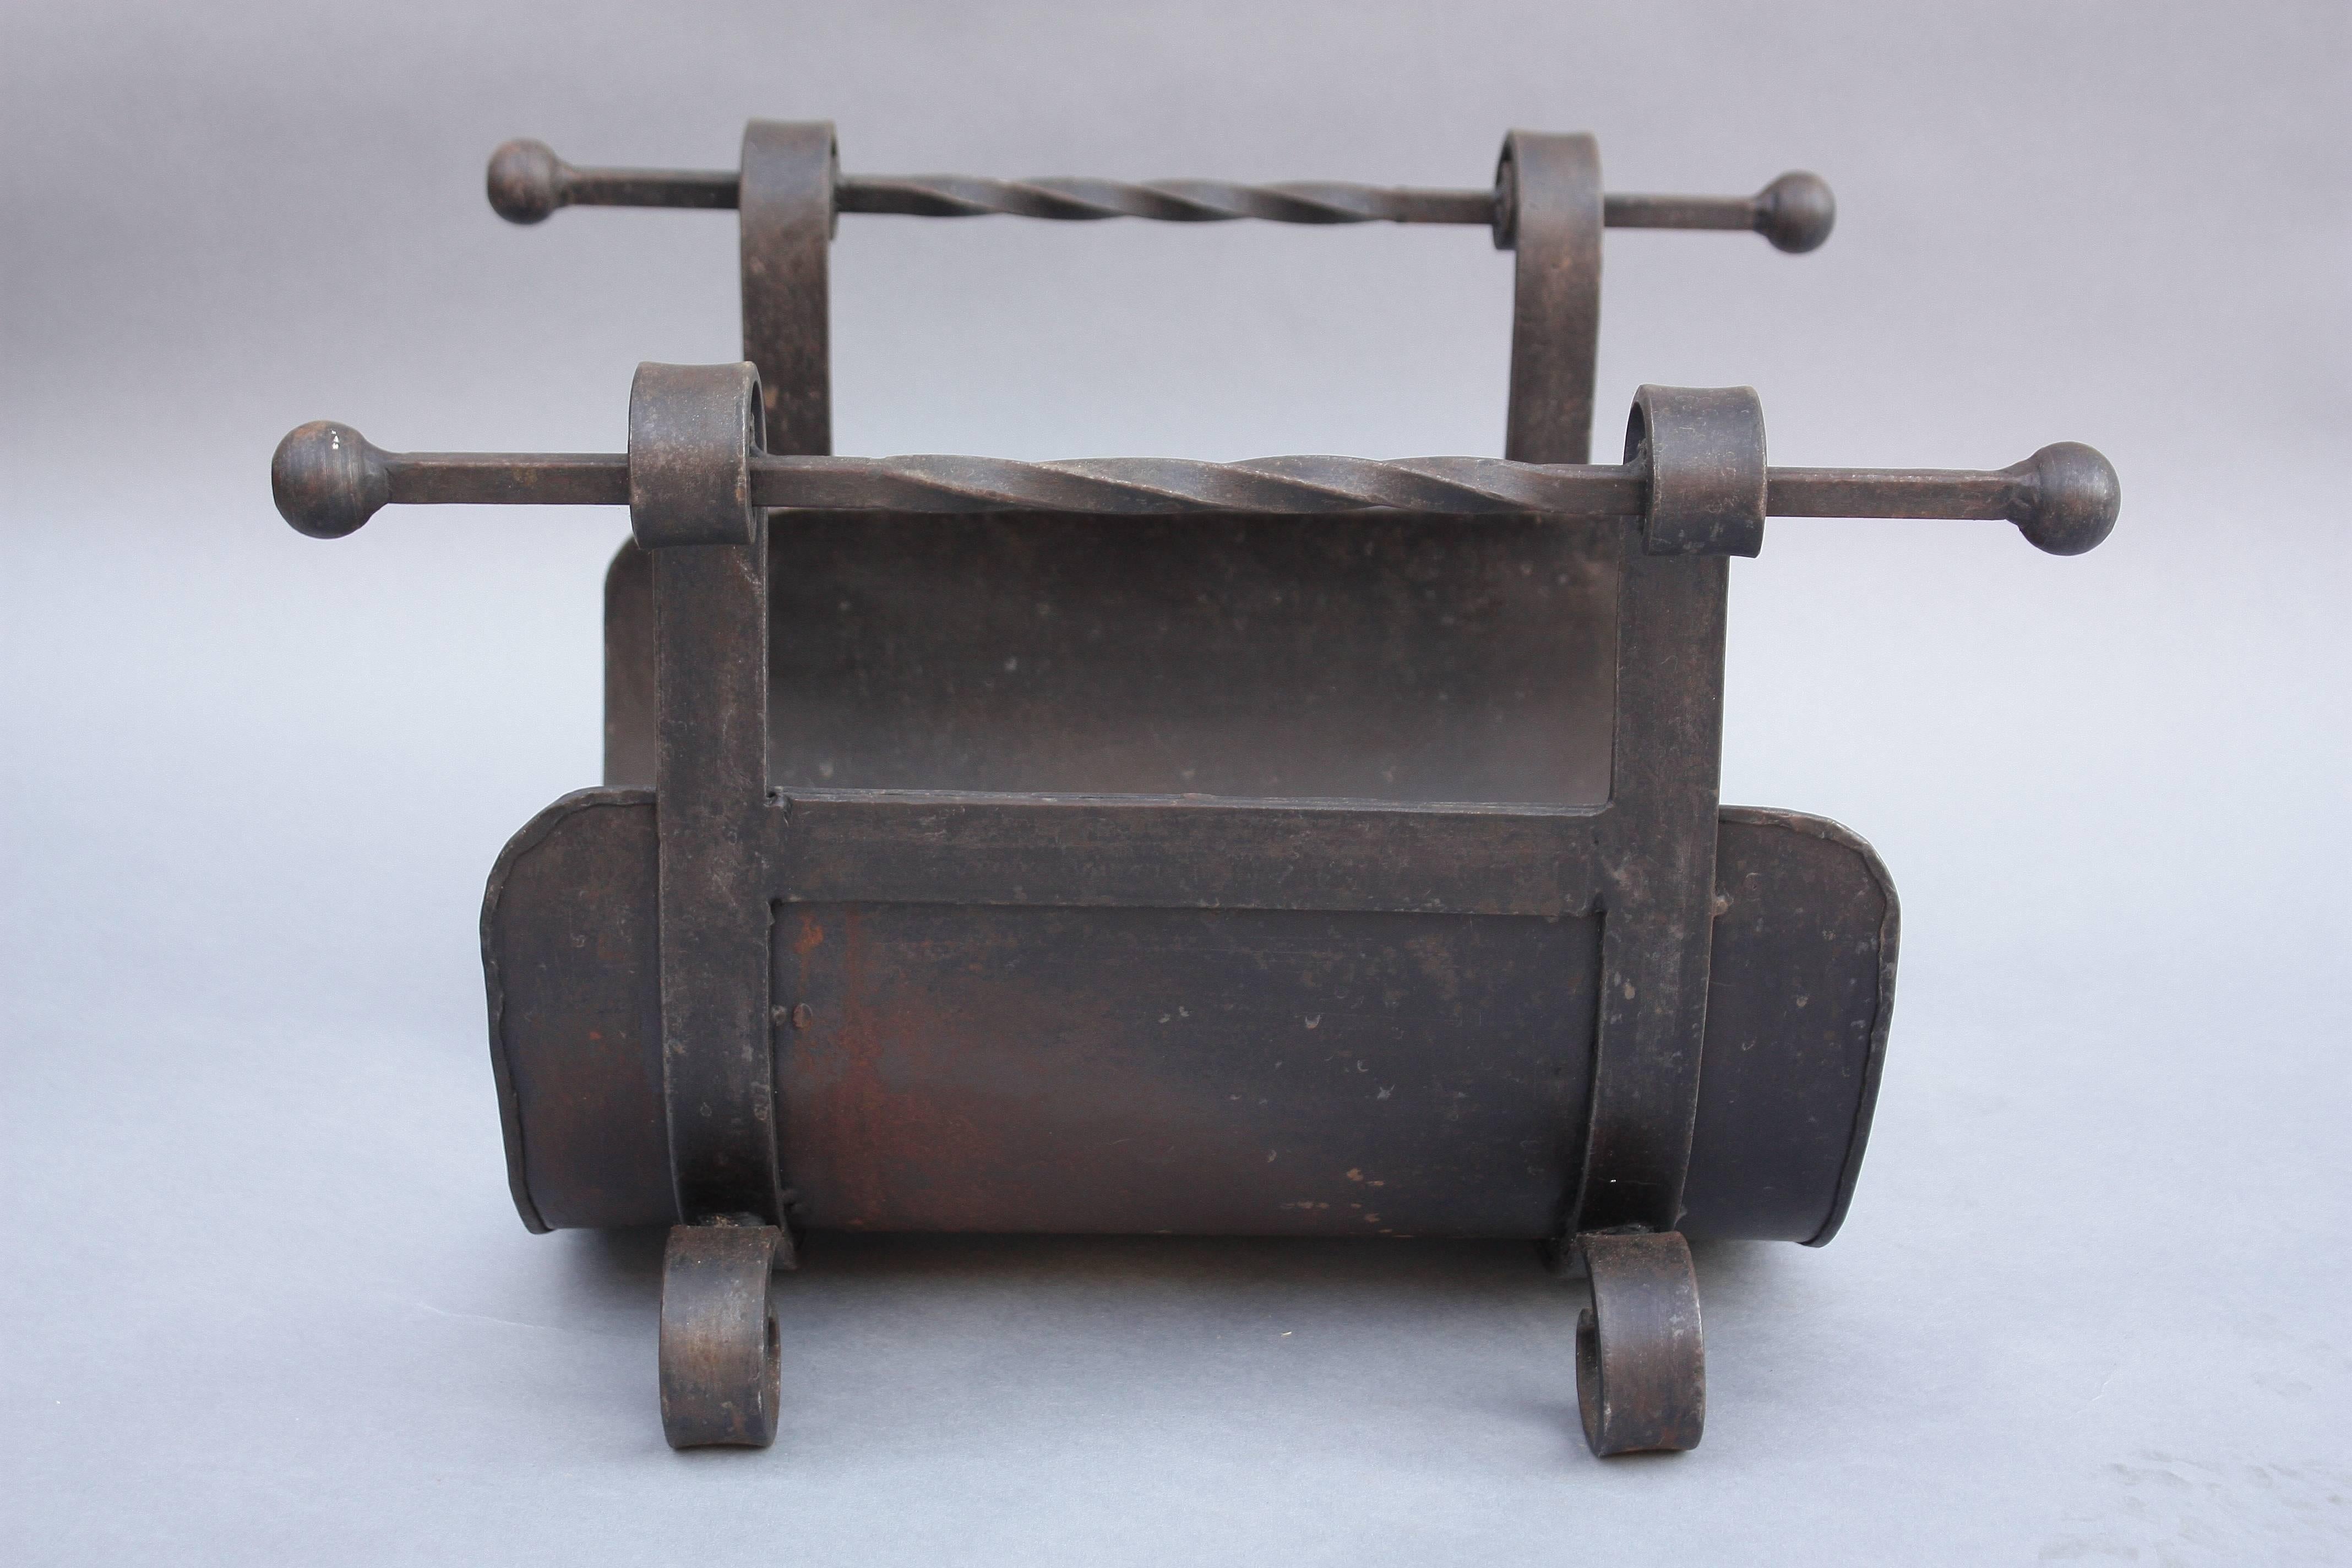 Handsome wrought iron log holder from the 1920s.